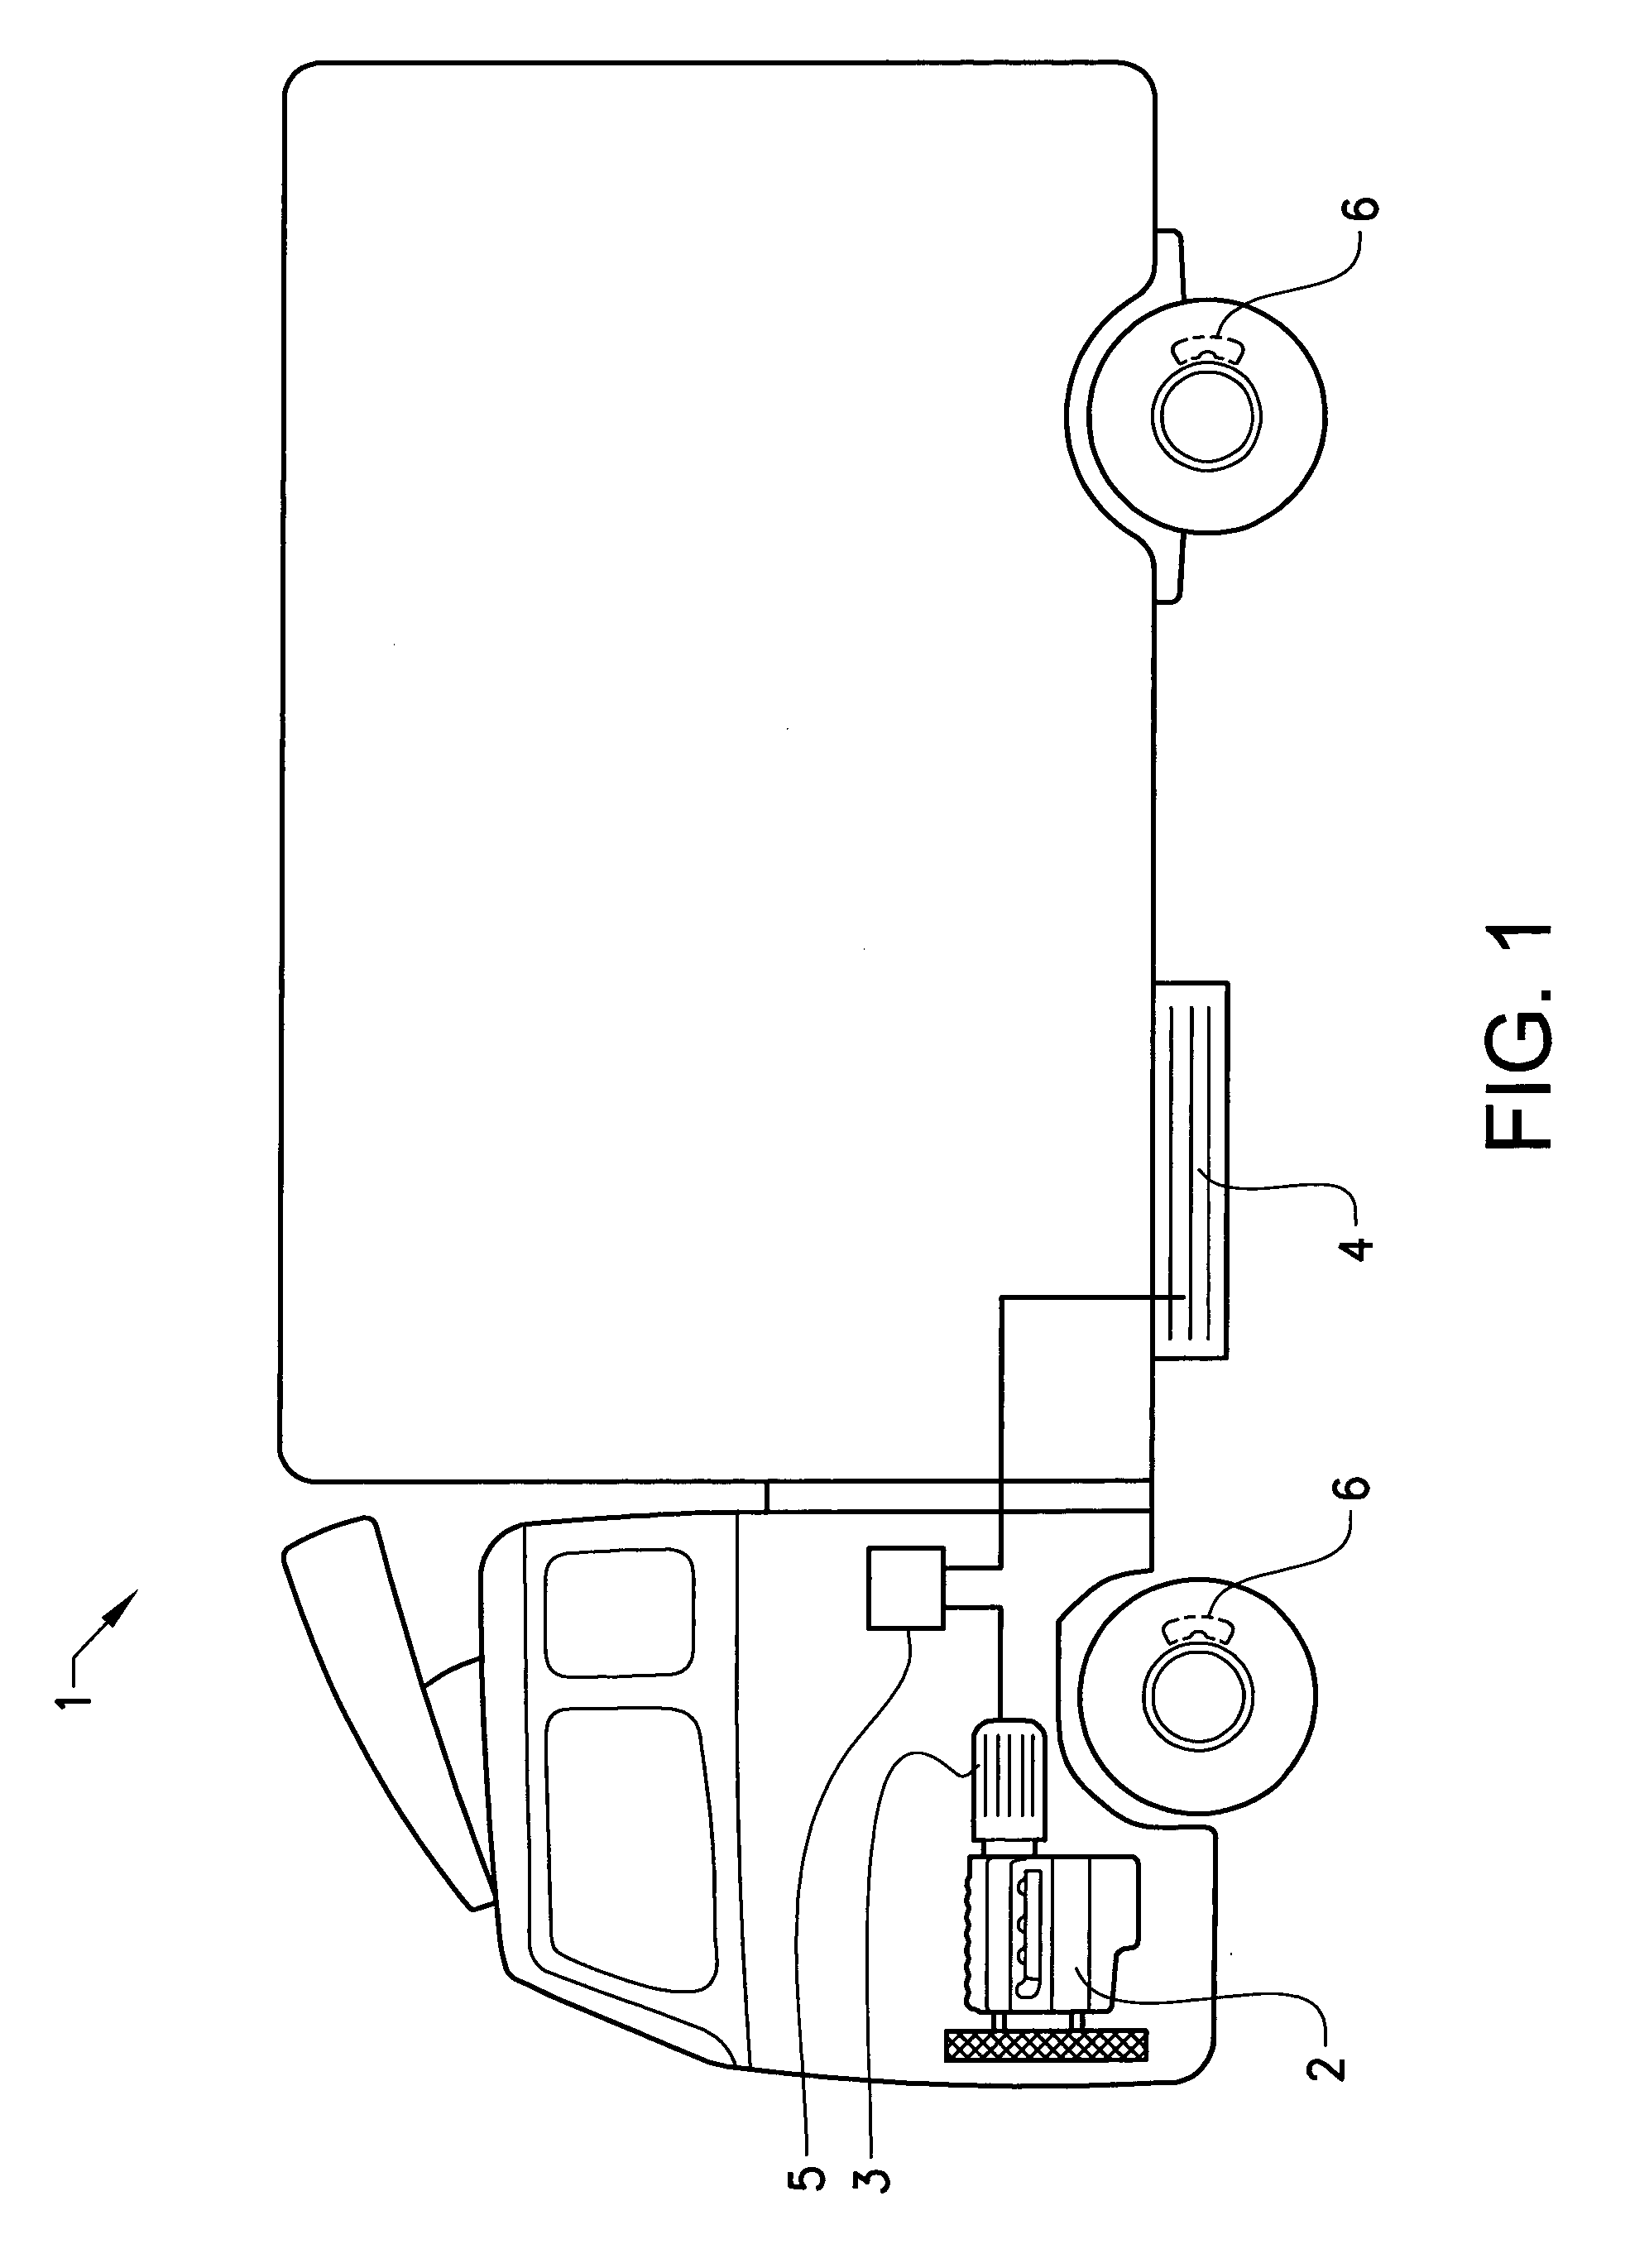 Method for determining energy efficiency of an energy system in a hybrid vehicle